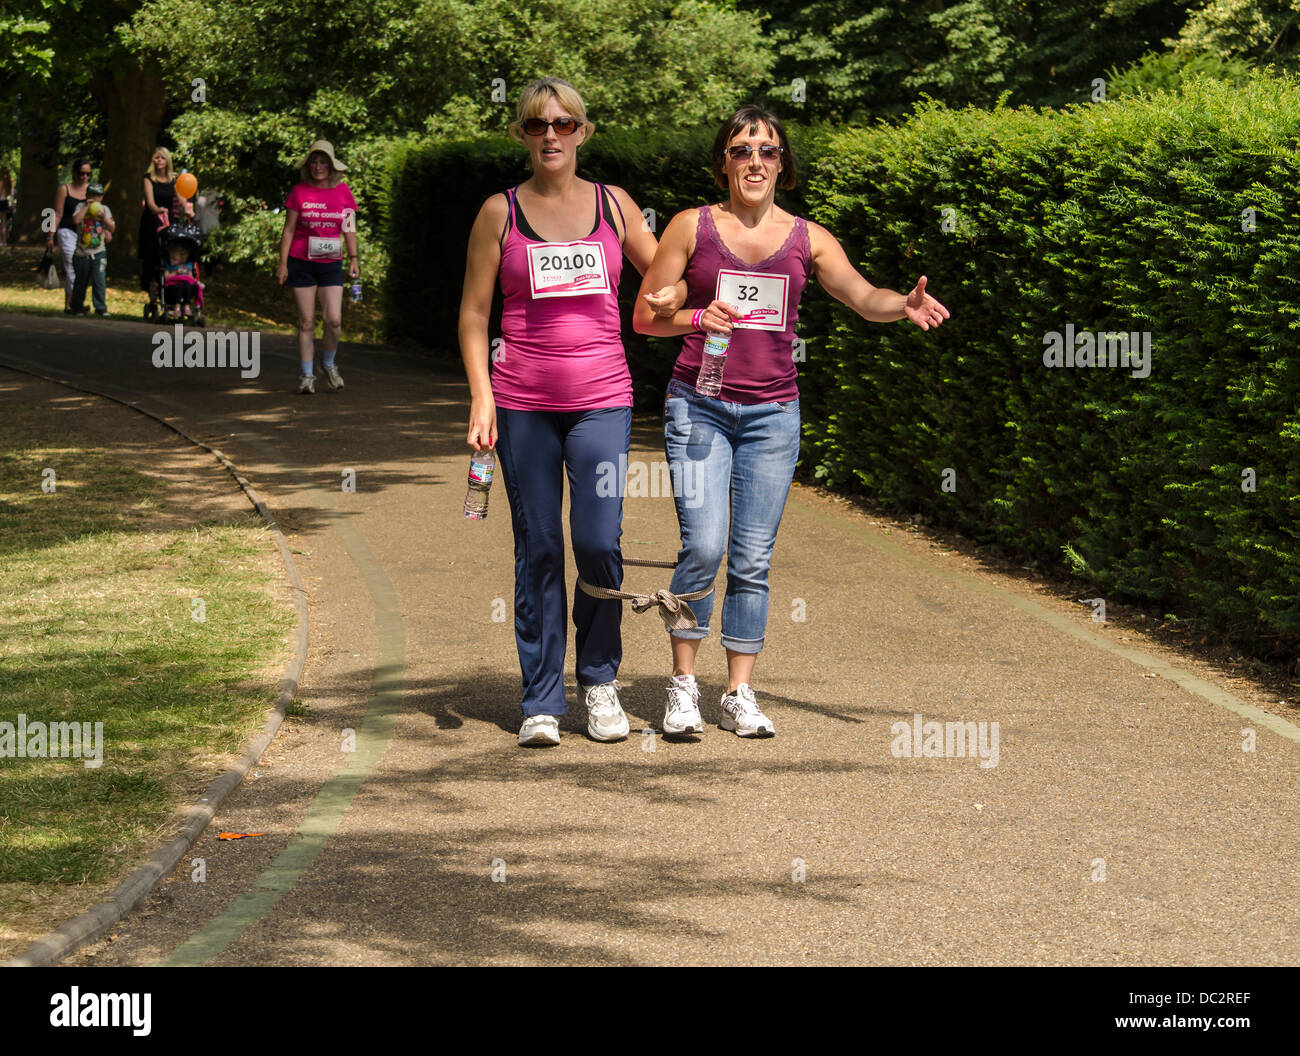 Doing a three leg race at a race for life UK Stock Photo